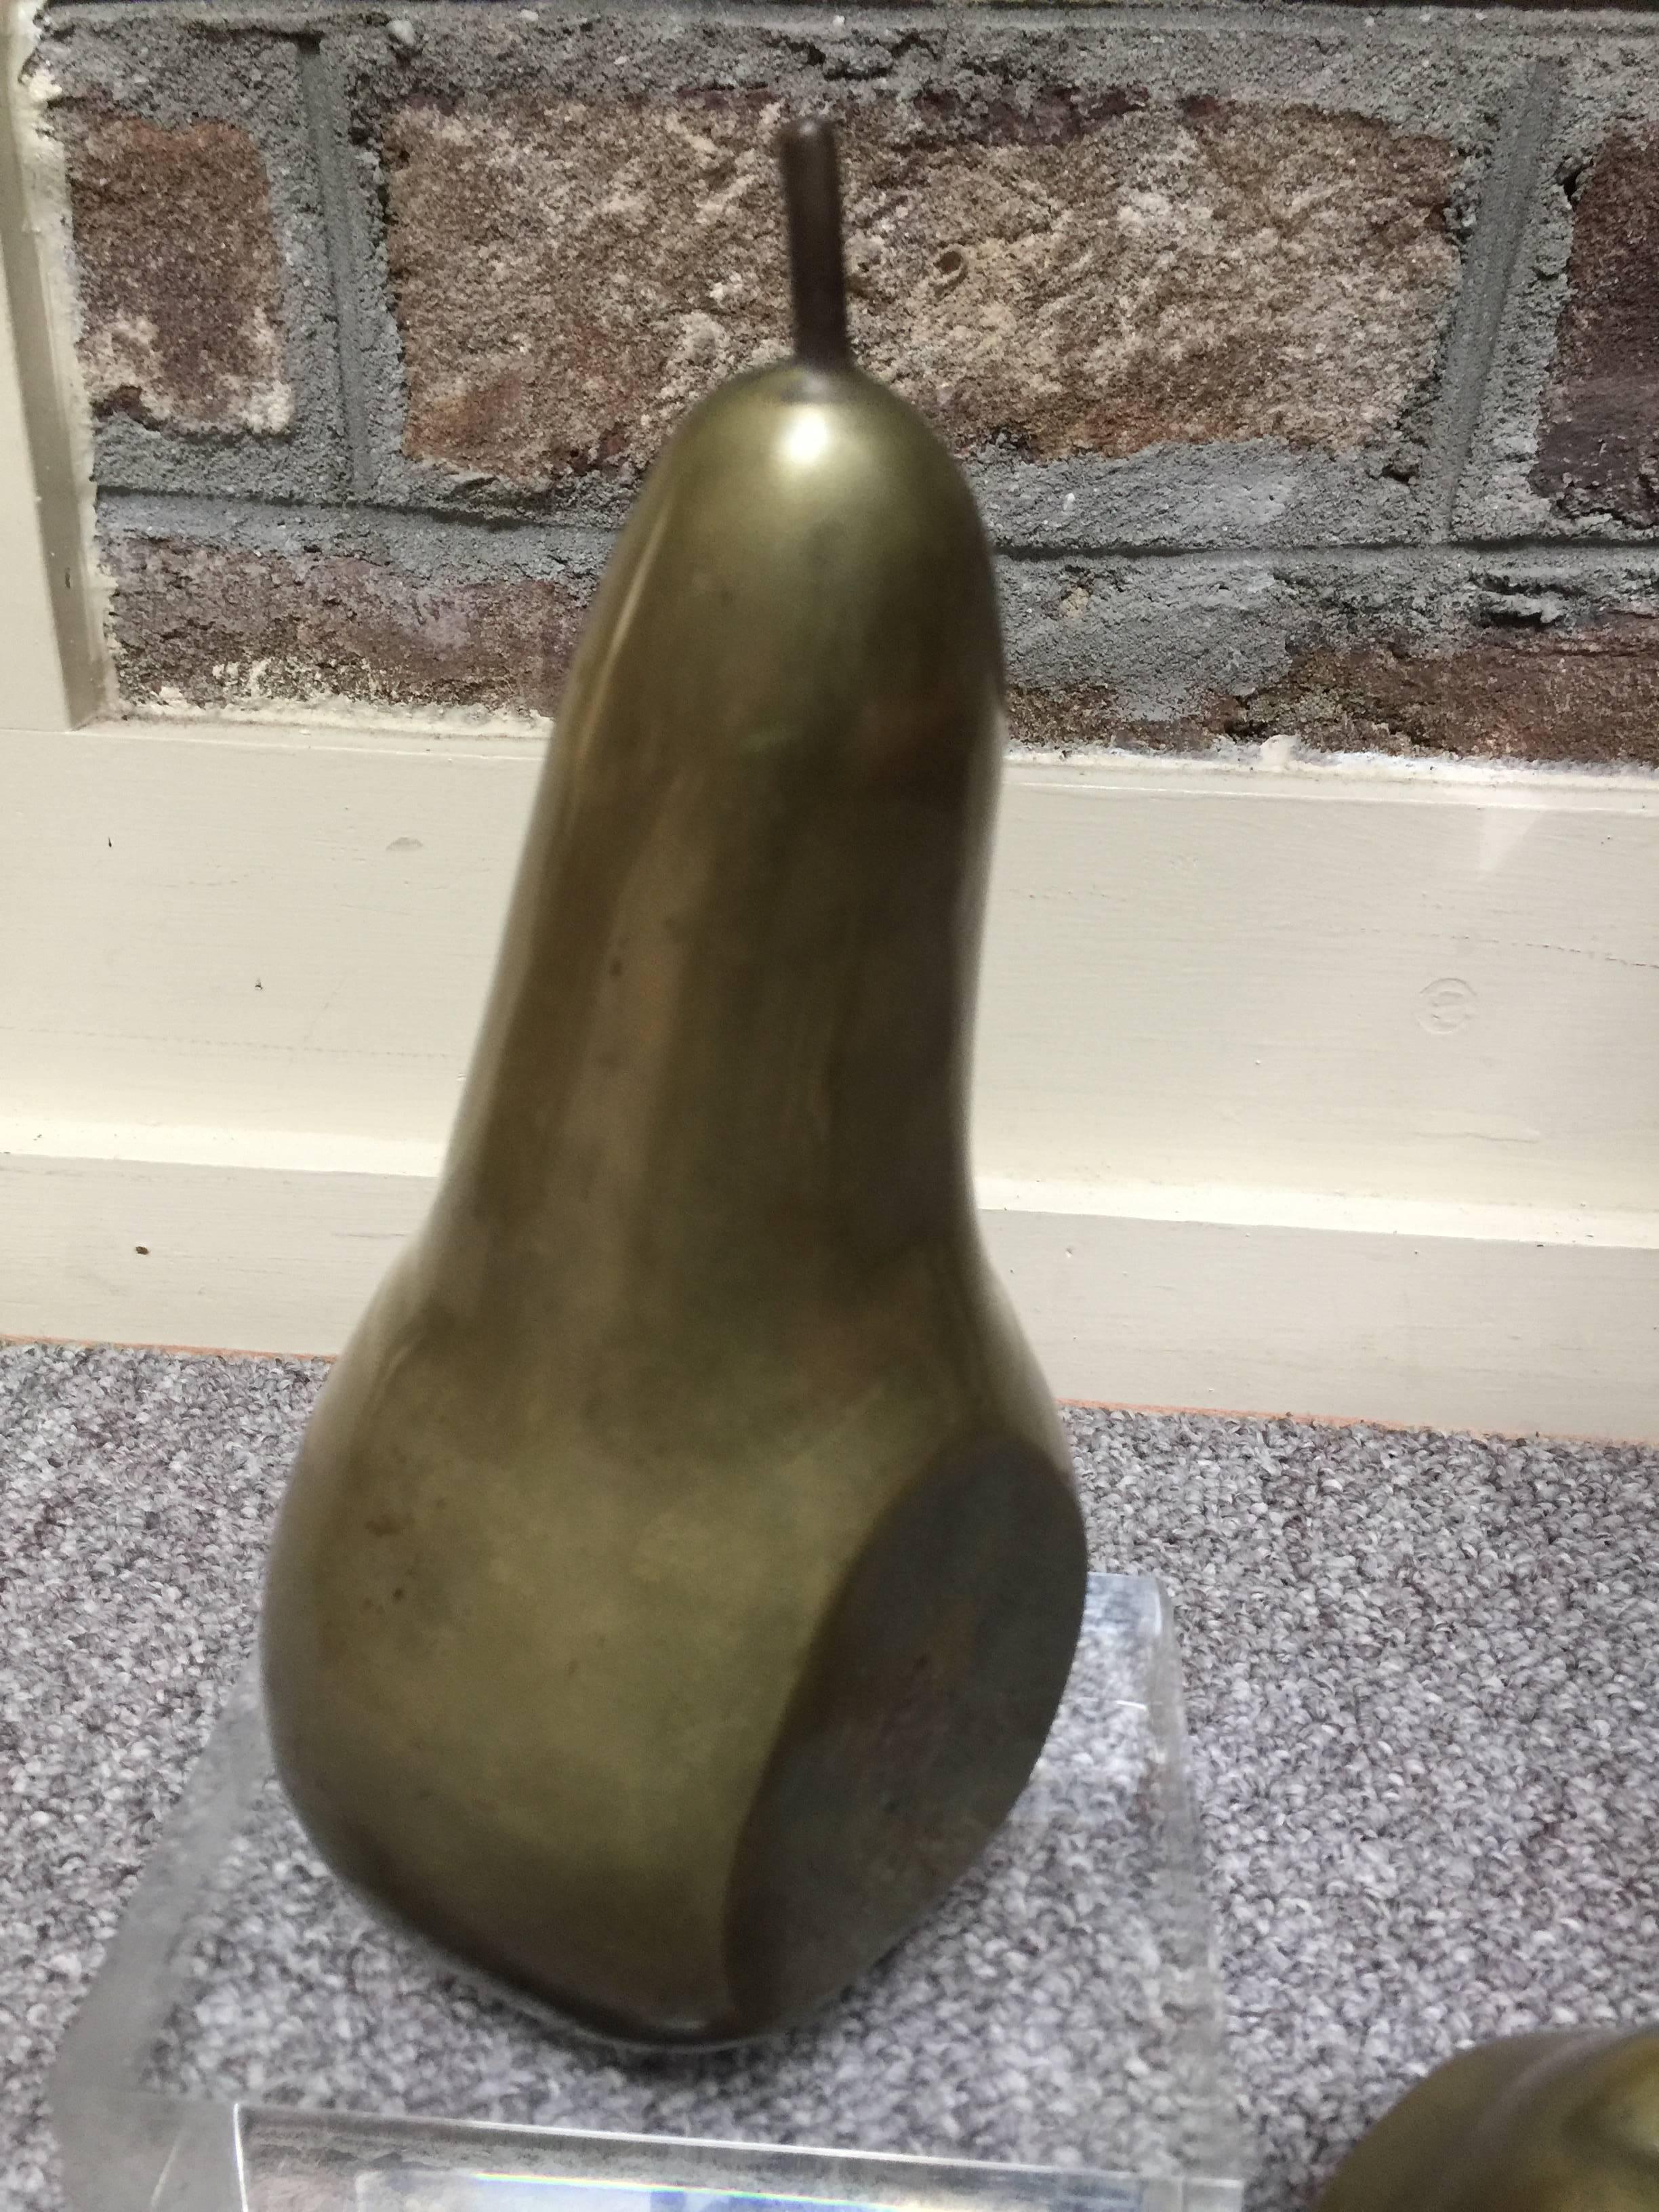 These brass fruit pieces are extremely weighty and marked Made in Italy
Measures: apple is 4 x 4 x 4
pear is 8.5 x 4 x 4.